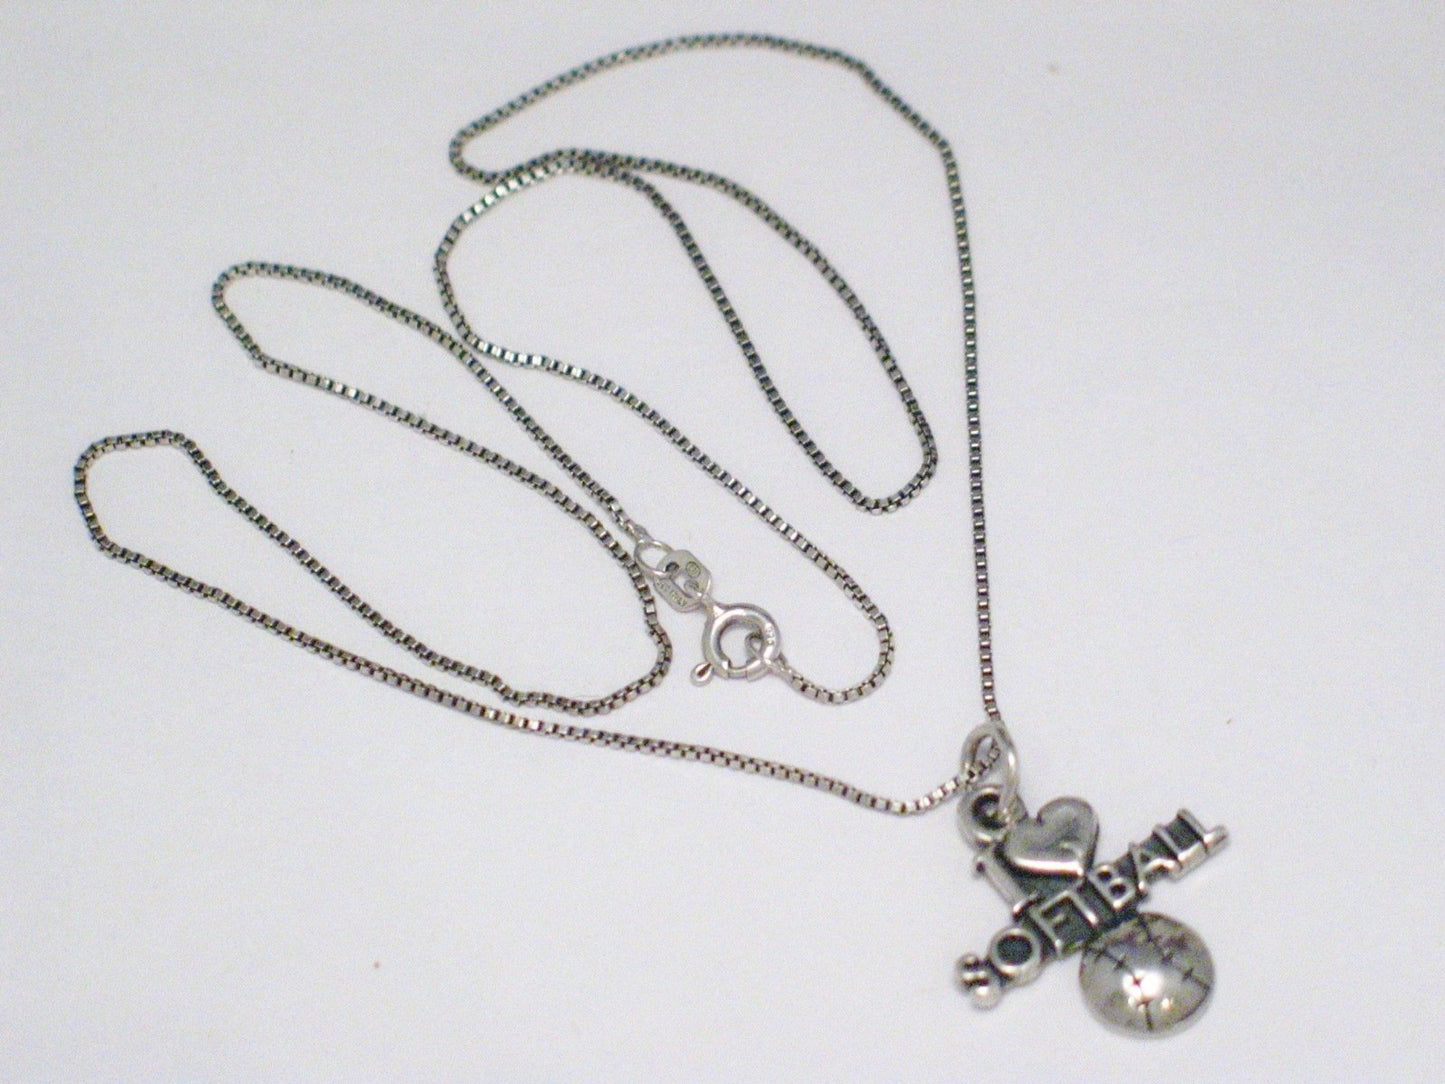 Pendant Necklace Bundle, Sterling Silver I Love Softball Charm Sports Statement Necklace - Blingschlingers Jewelry